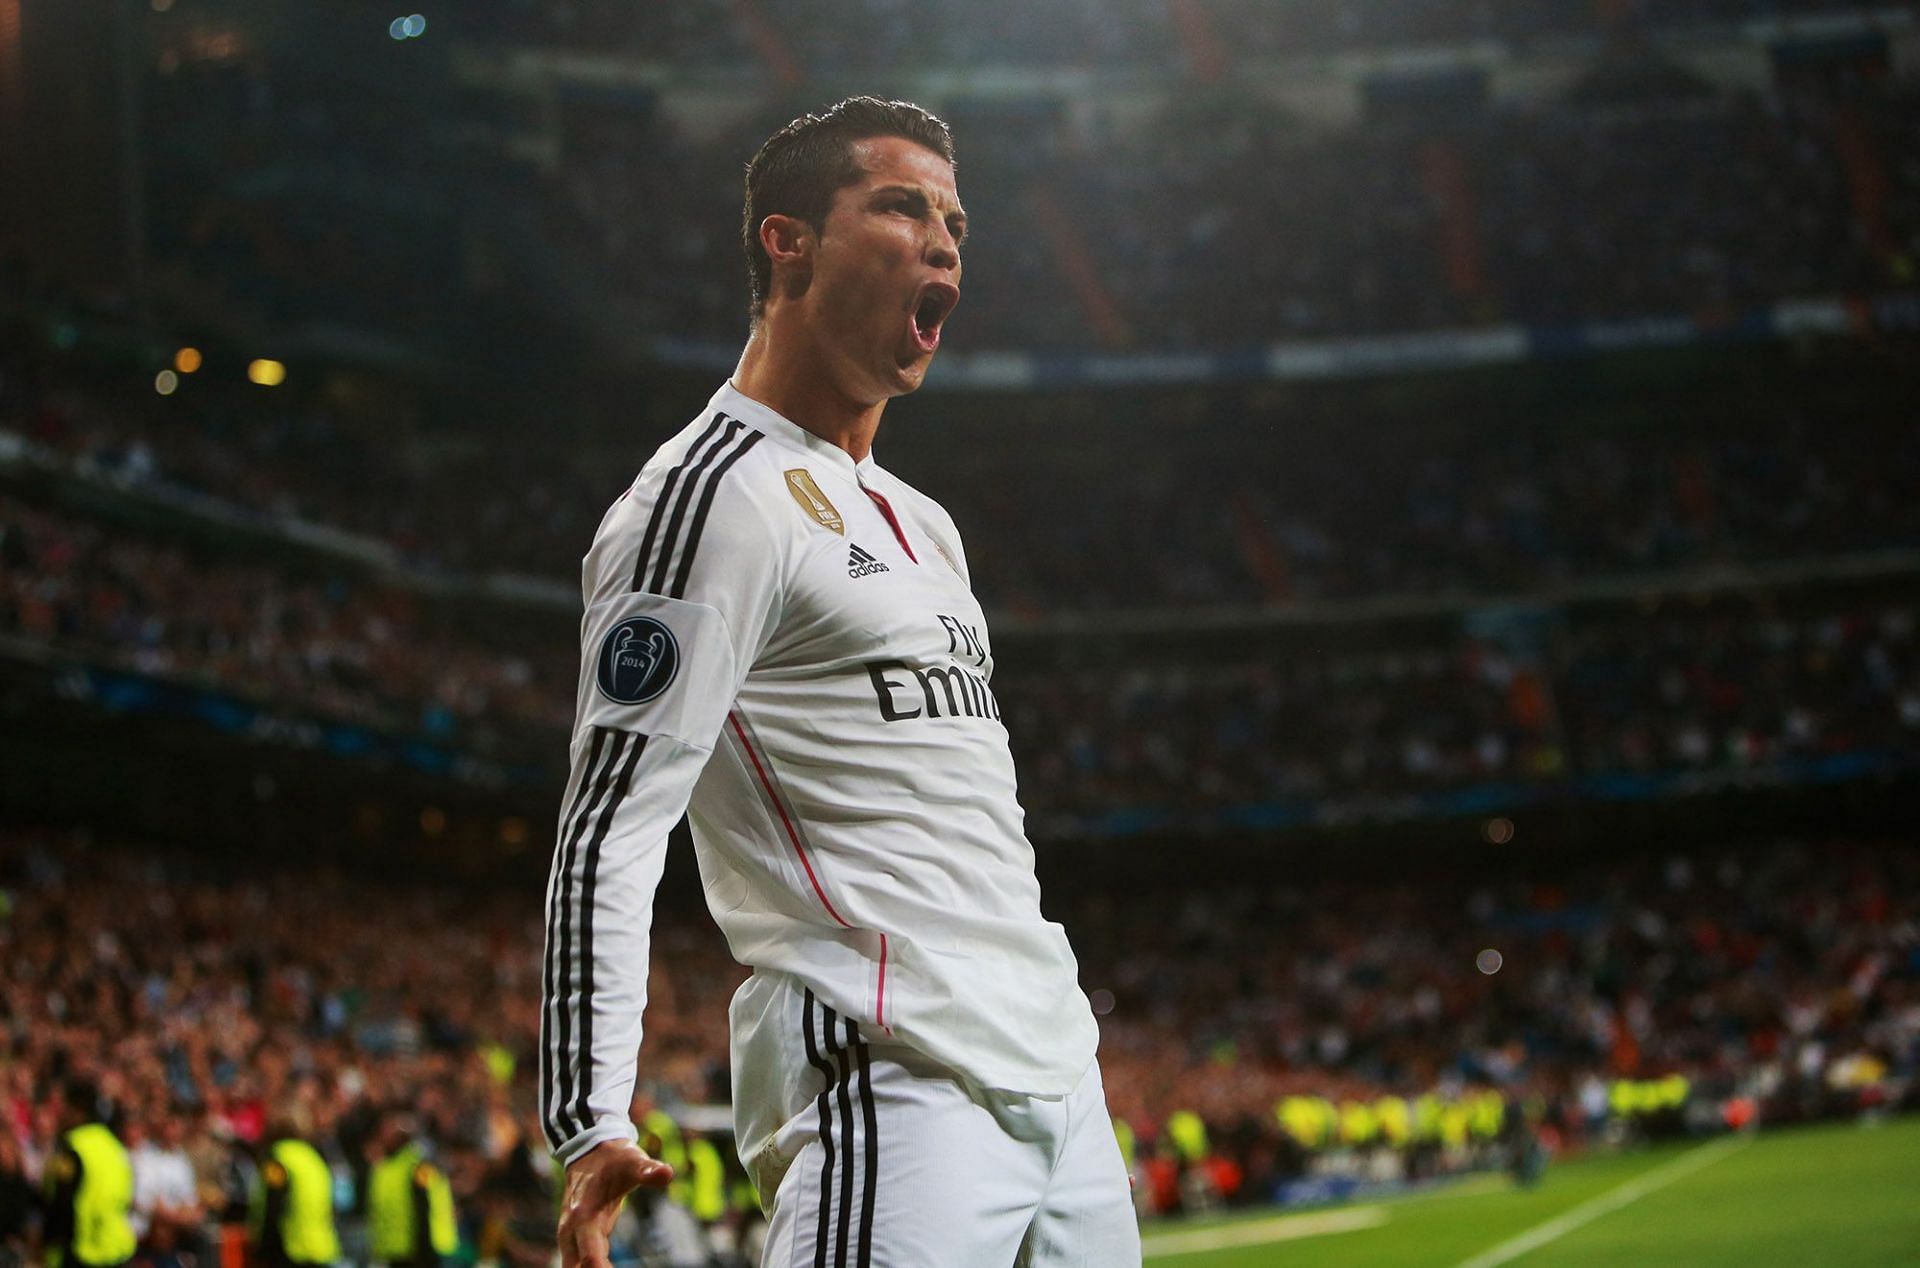 Cristiano Ronaldo caught in the act as he belts out his iconic 